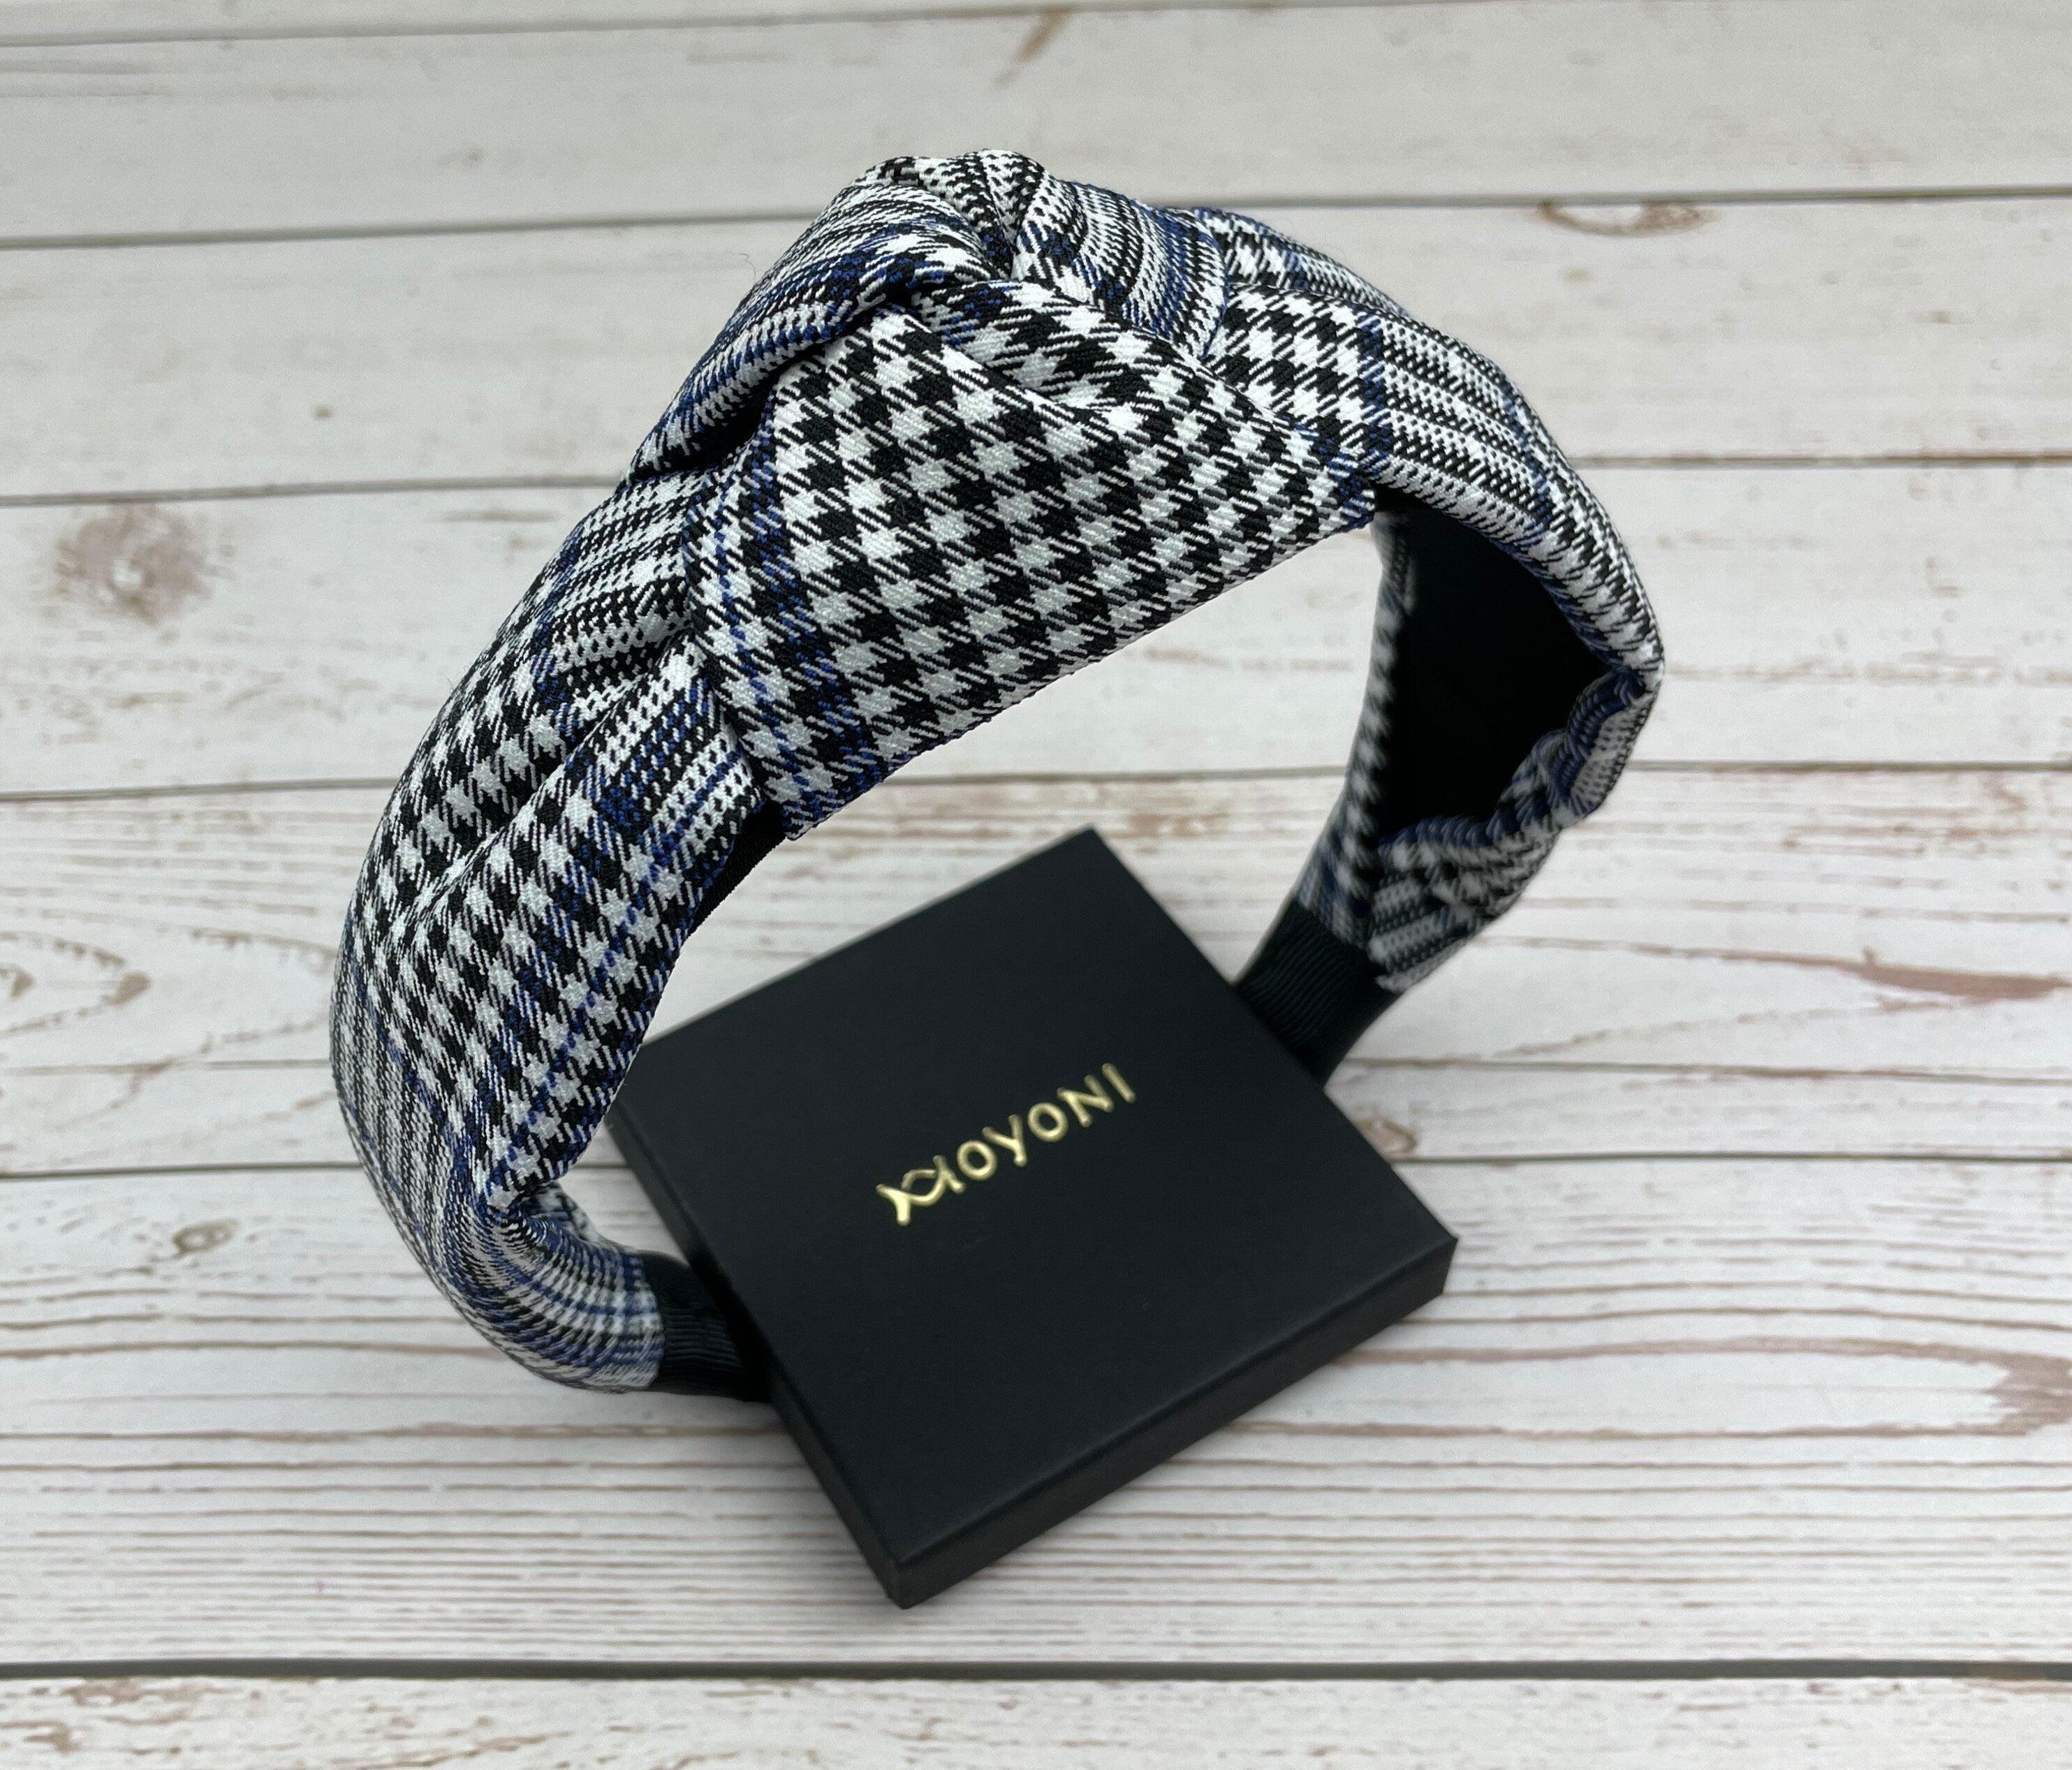 Make a statement with this dark blue striped headband, a classic accessory for the modern woman.